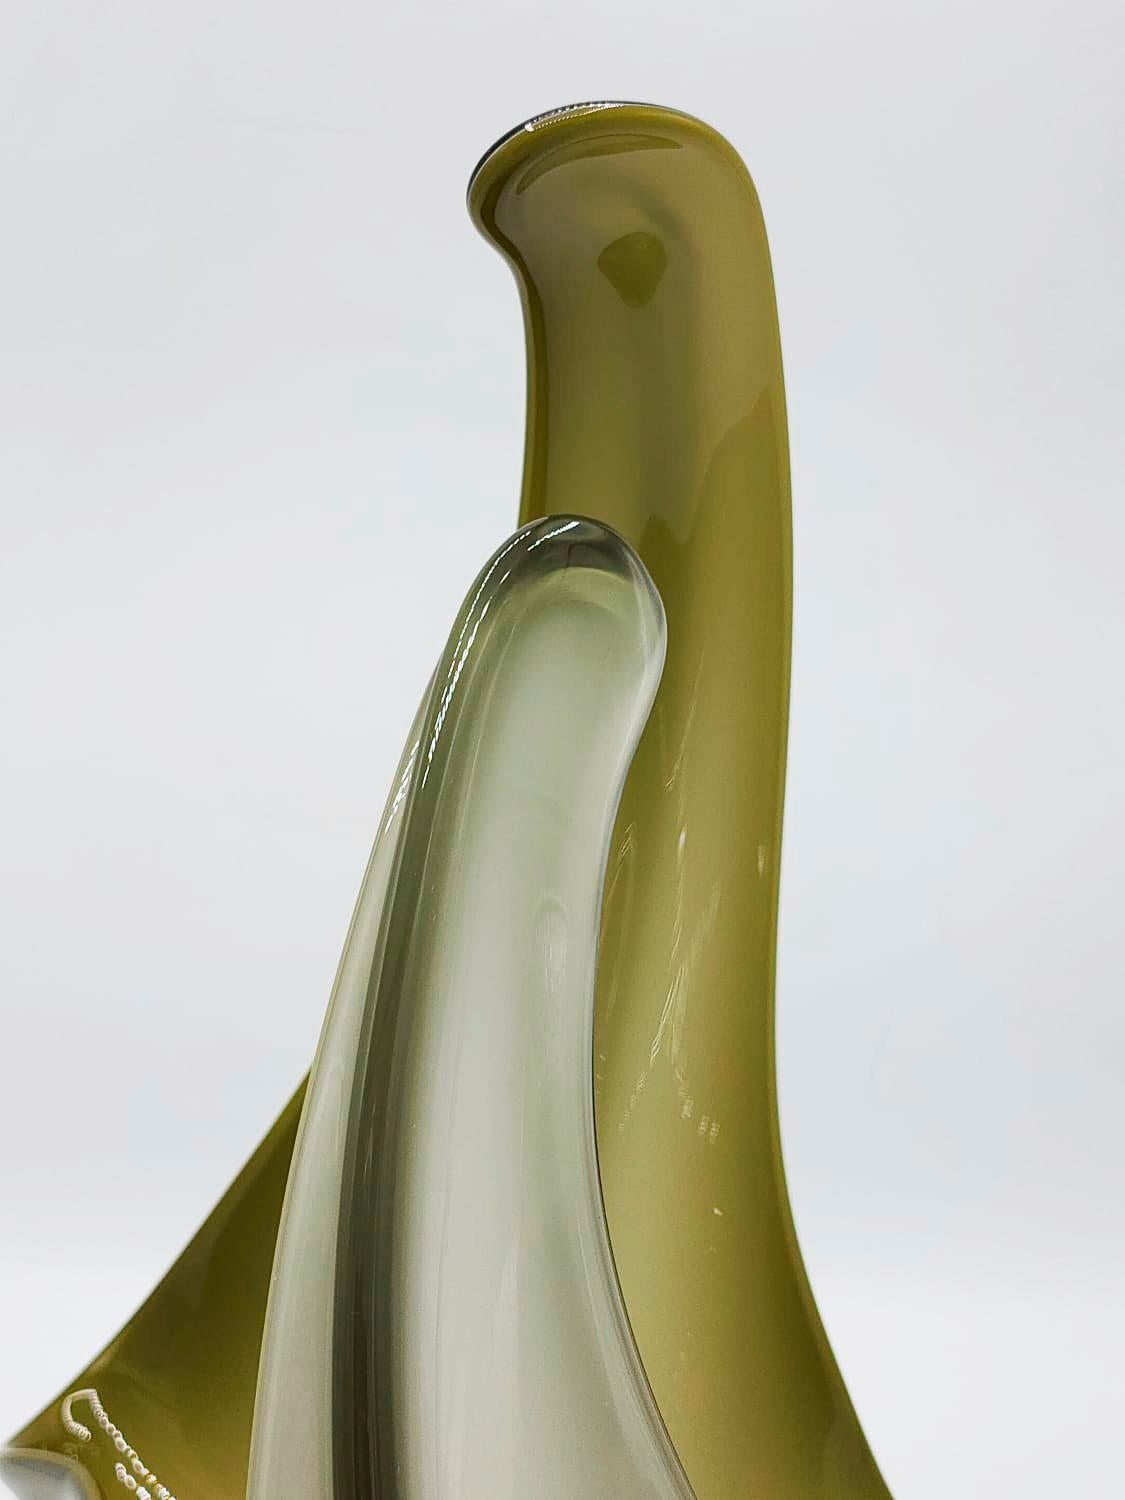 Art Glass Italian modernist Murano glass vase with green tones for centerpiece For Sale